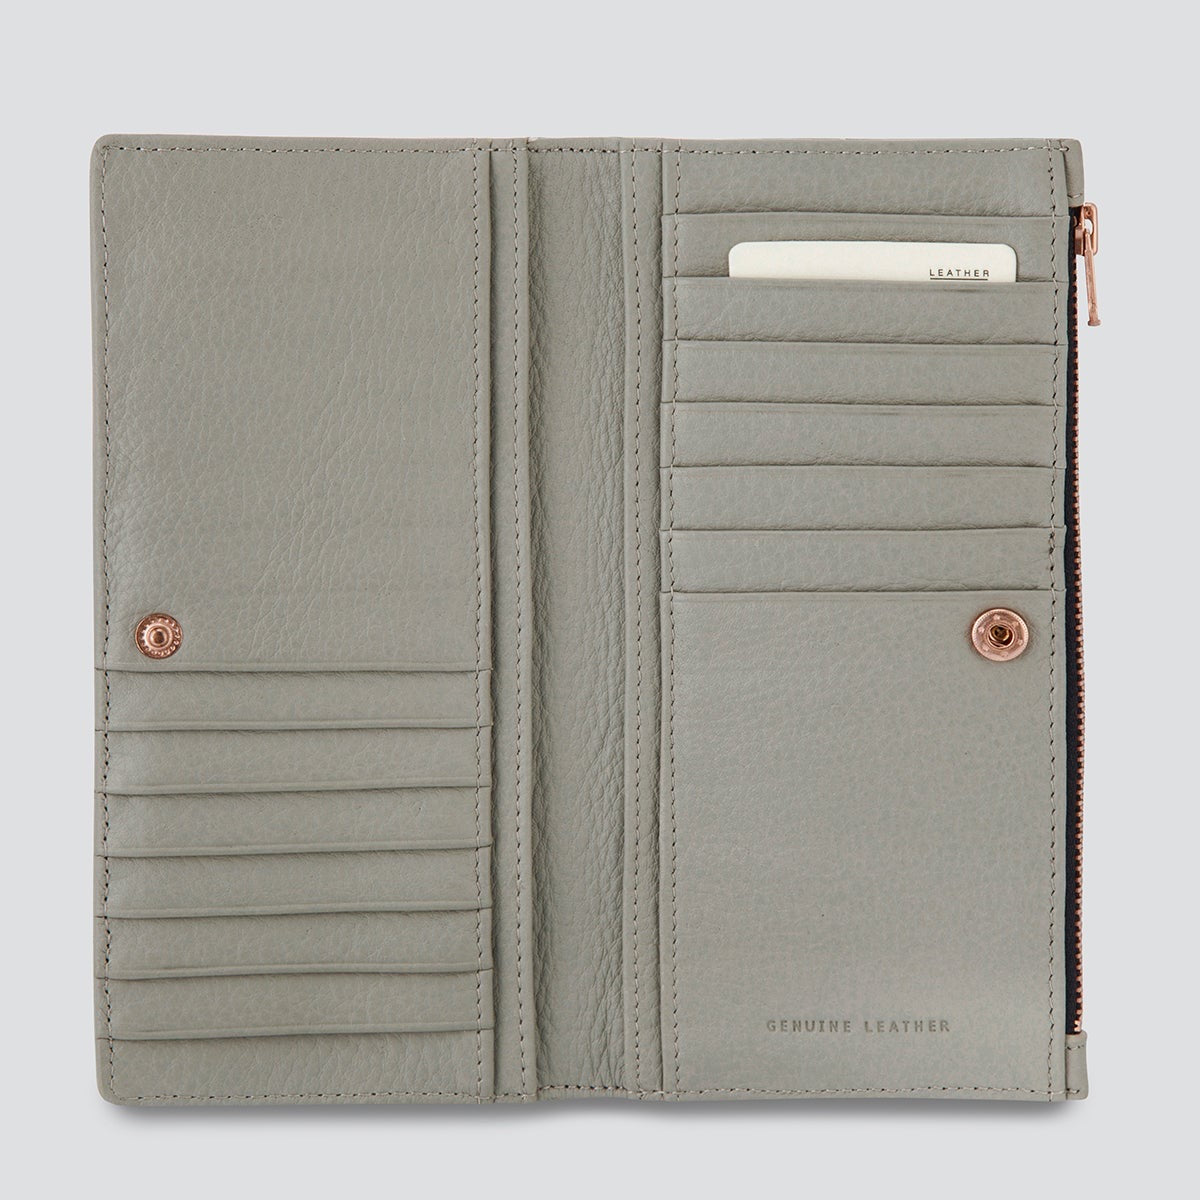 In The Beginning Leather Wallet - Light Grey